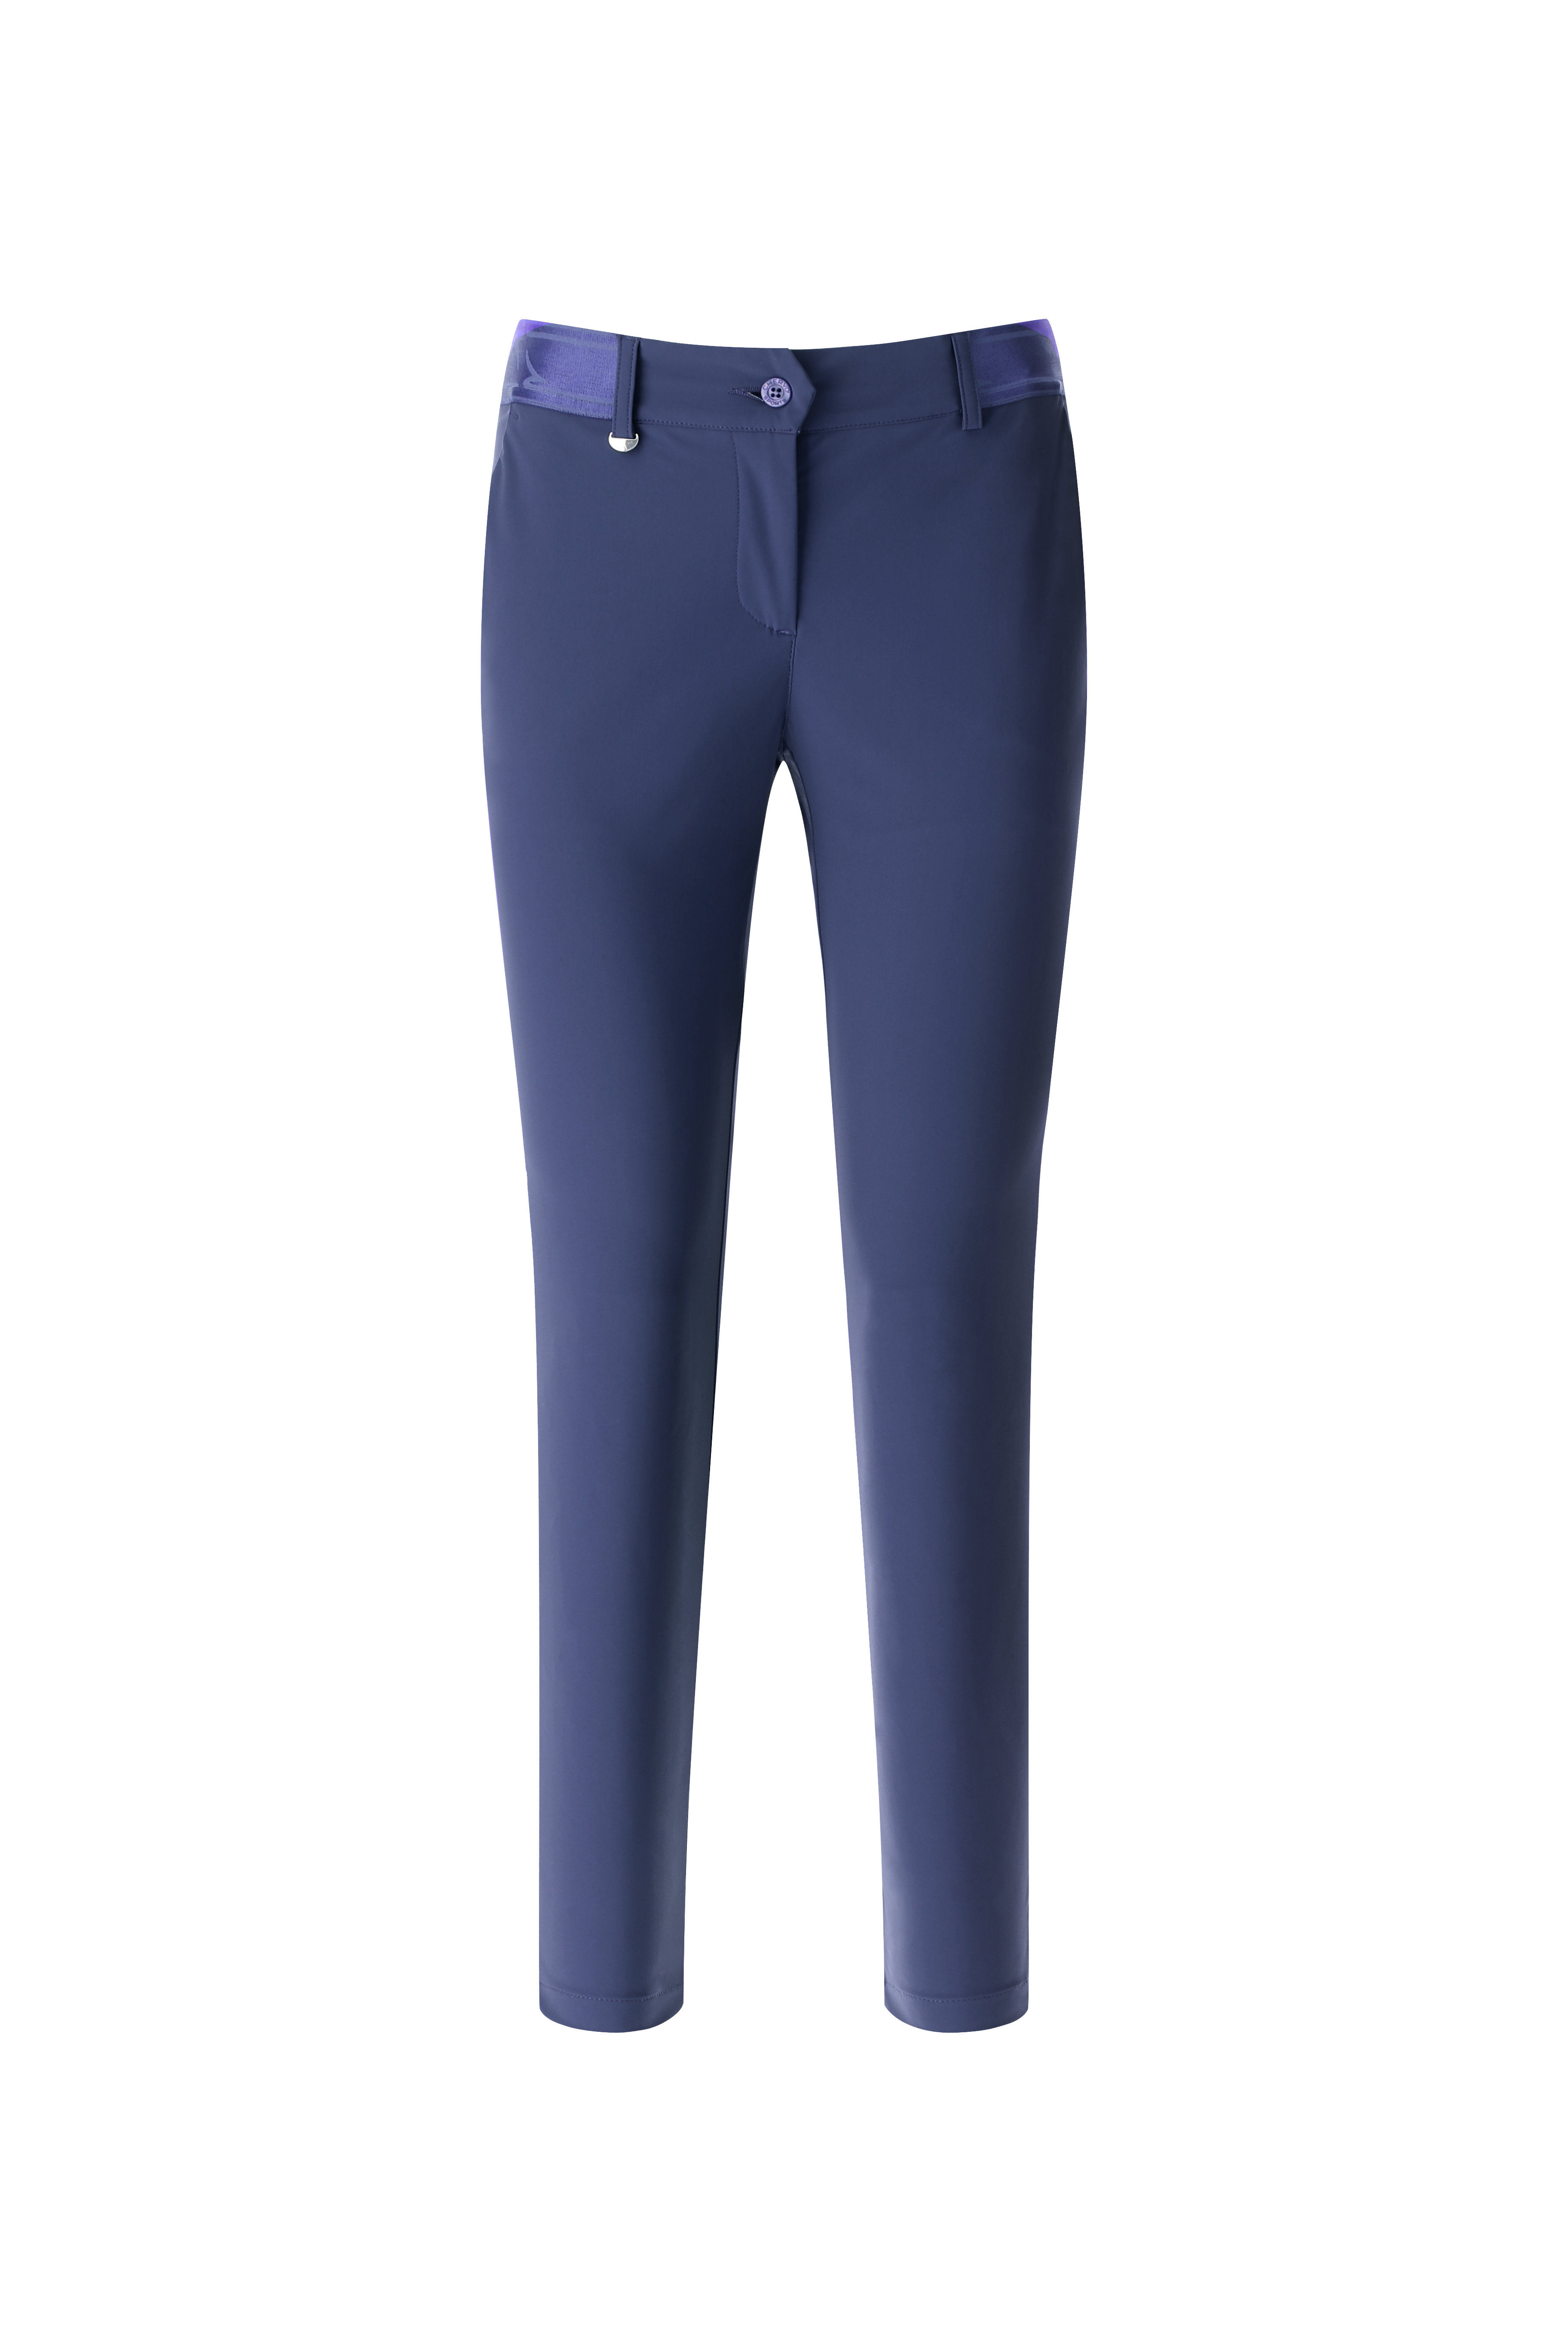 Ping Tour Tapered Performance SensorCool Trousers - Pearl Grey